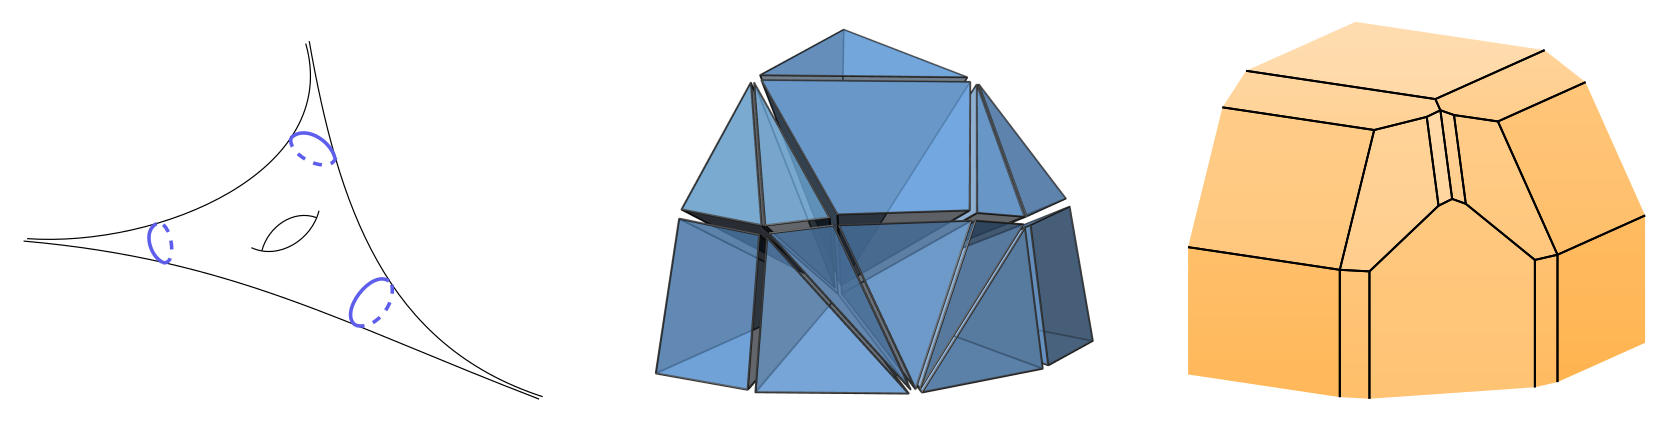 secondary fan and polyhedron